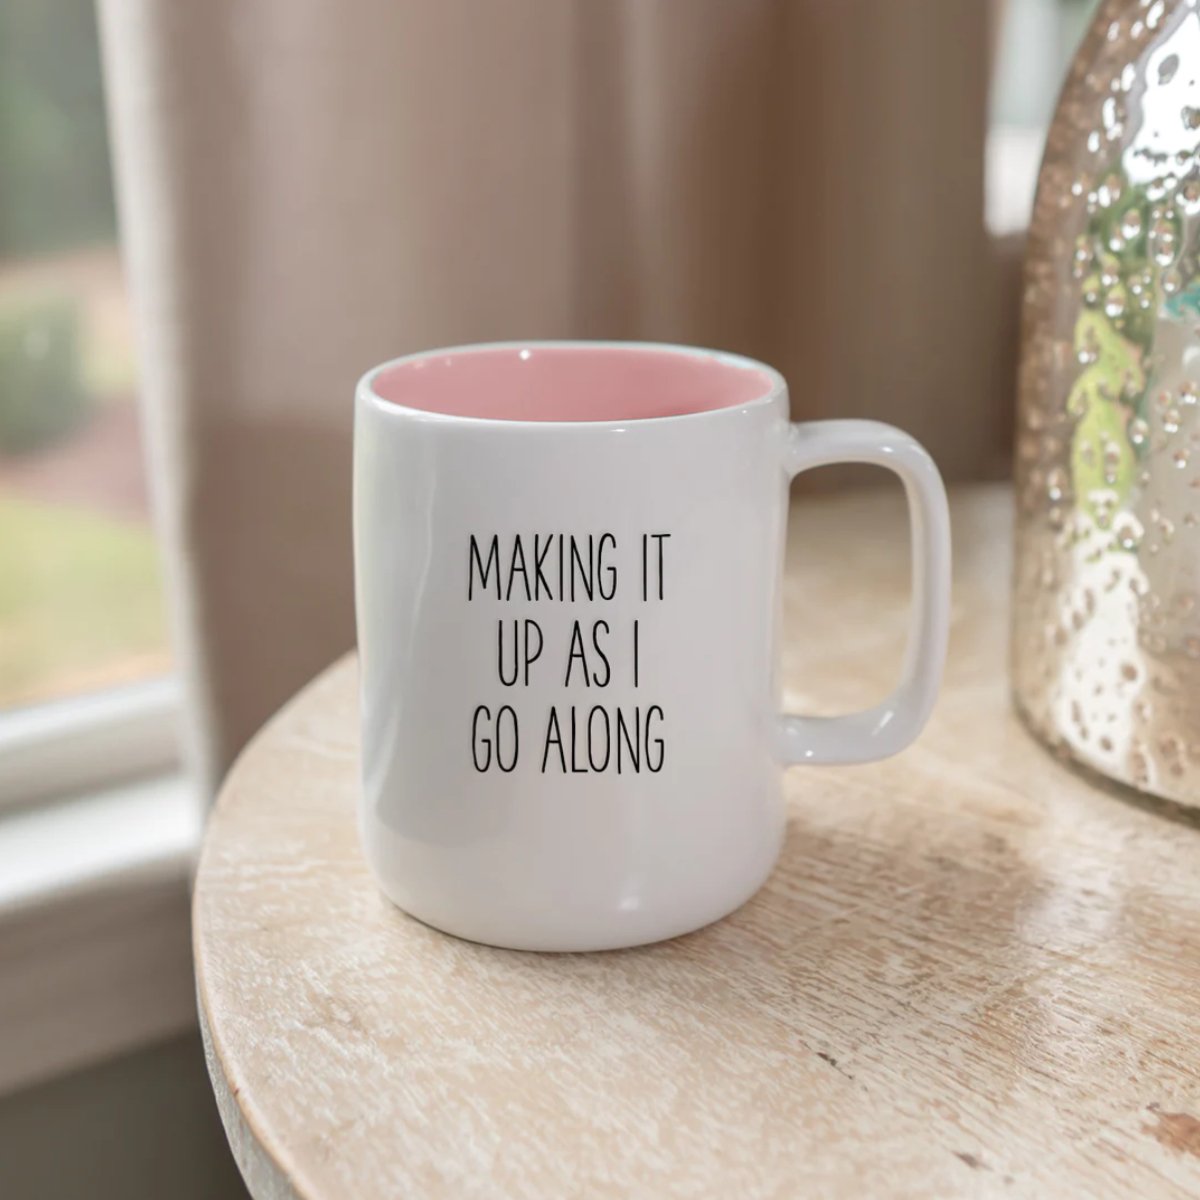 Mary Square "Making It Up" Ceramic Mug (19oz) - CeCe's Home & Gifts